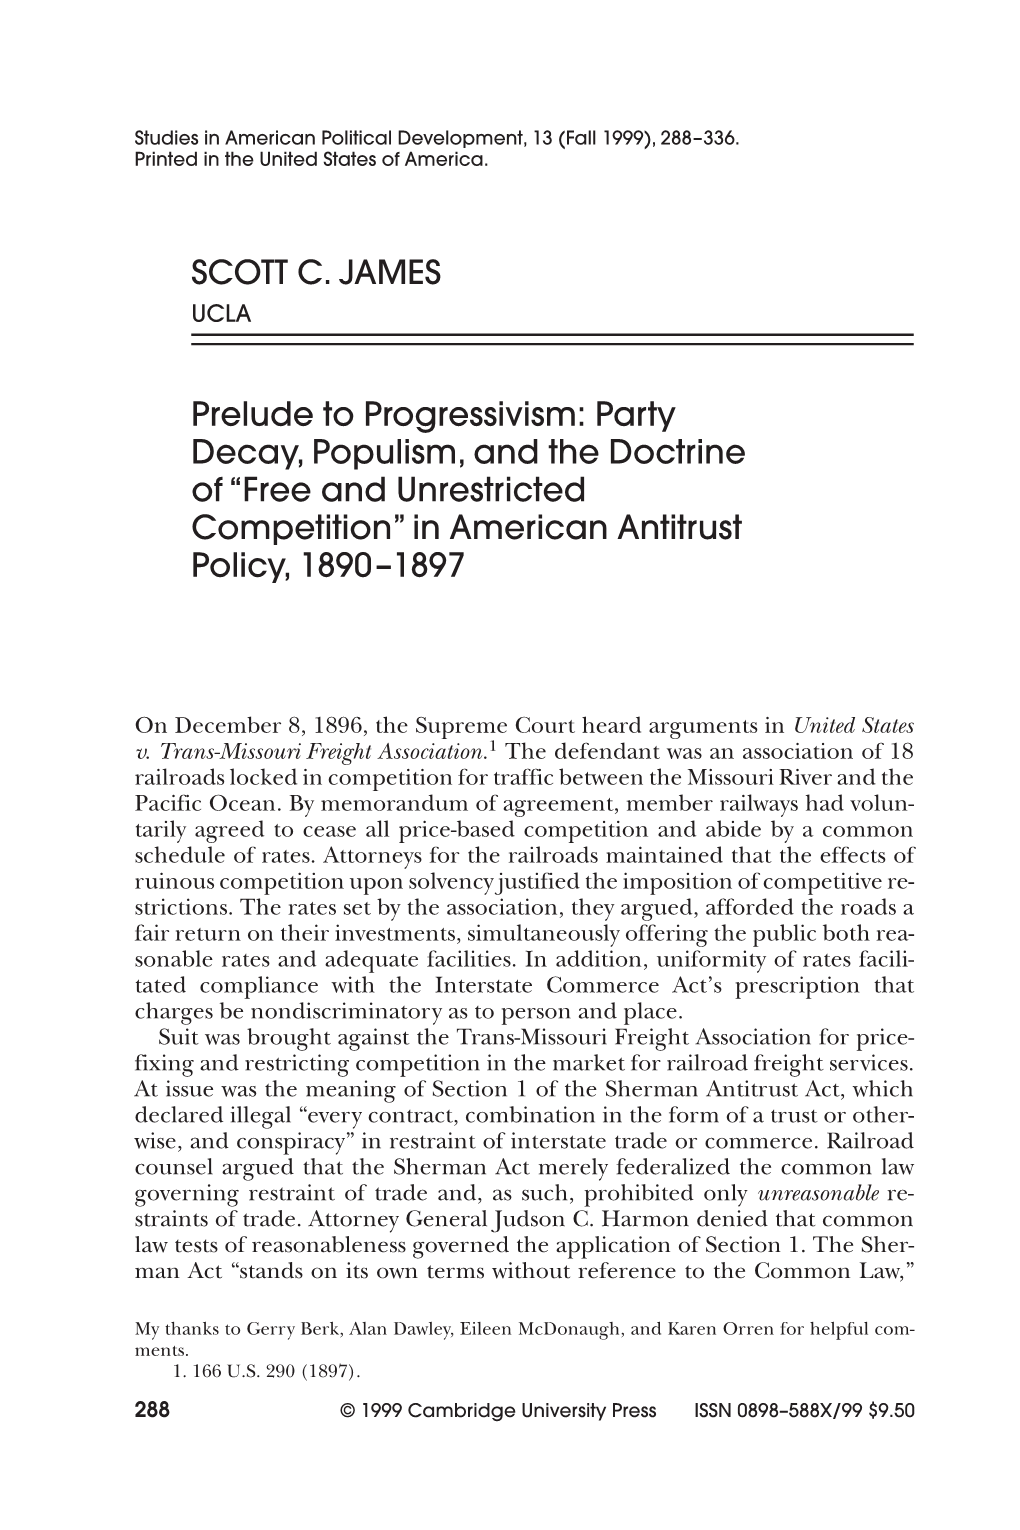 Party Decay, Populism, and the Doctrine of “Free and Unrestricted Competition” in American Antitrust Policy, 1890–1897